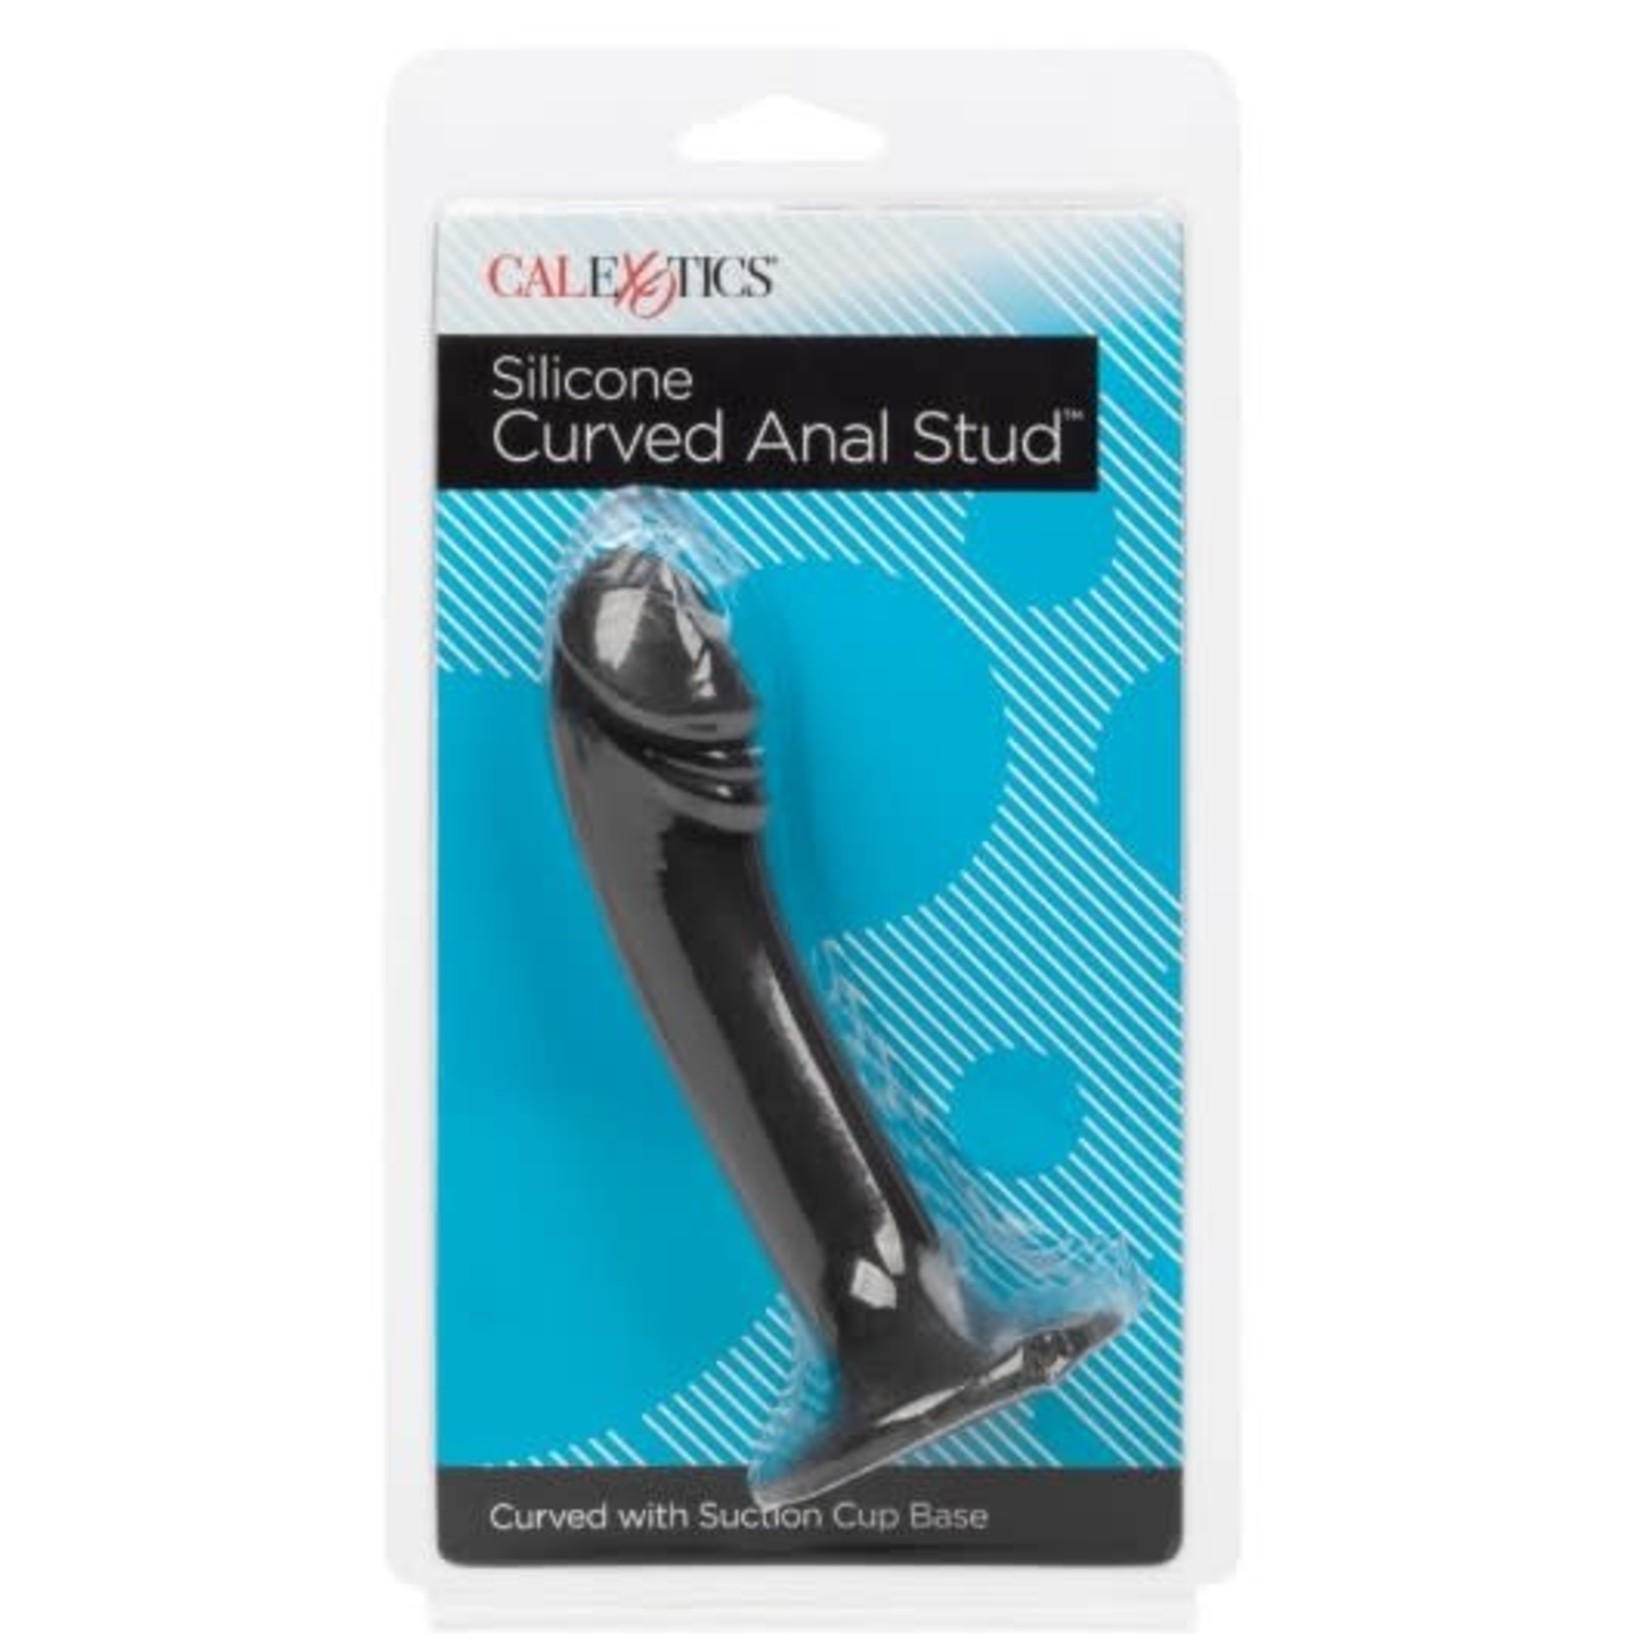 CALEXOTICS SILICONE CURVED ANAL STUD